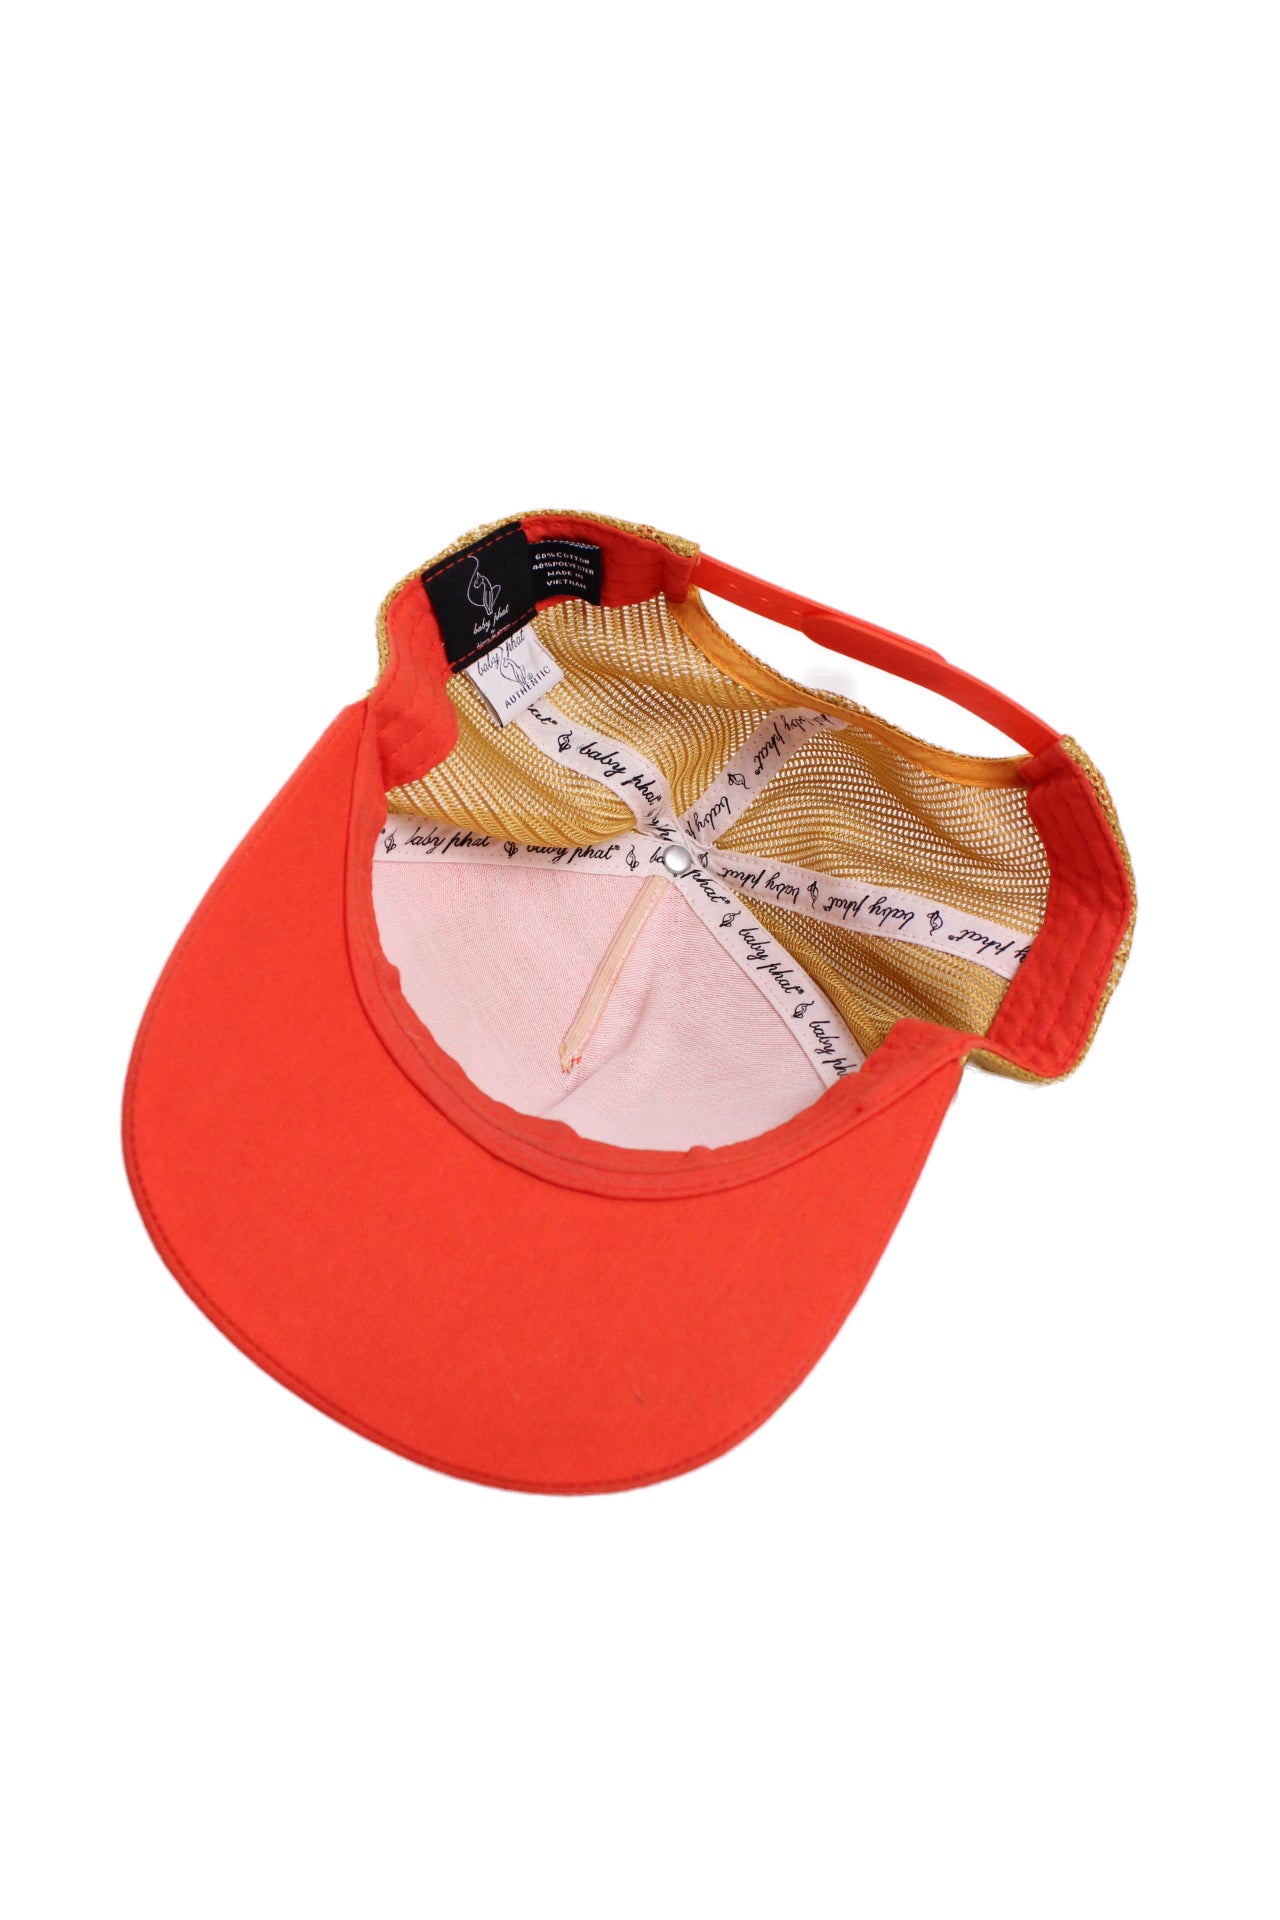 angled image of the orange trucker hat laid flat upside down showcasing the cap’s interior and branded trimming reading “baby phat”